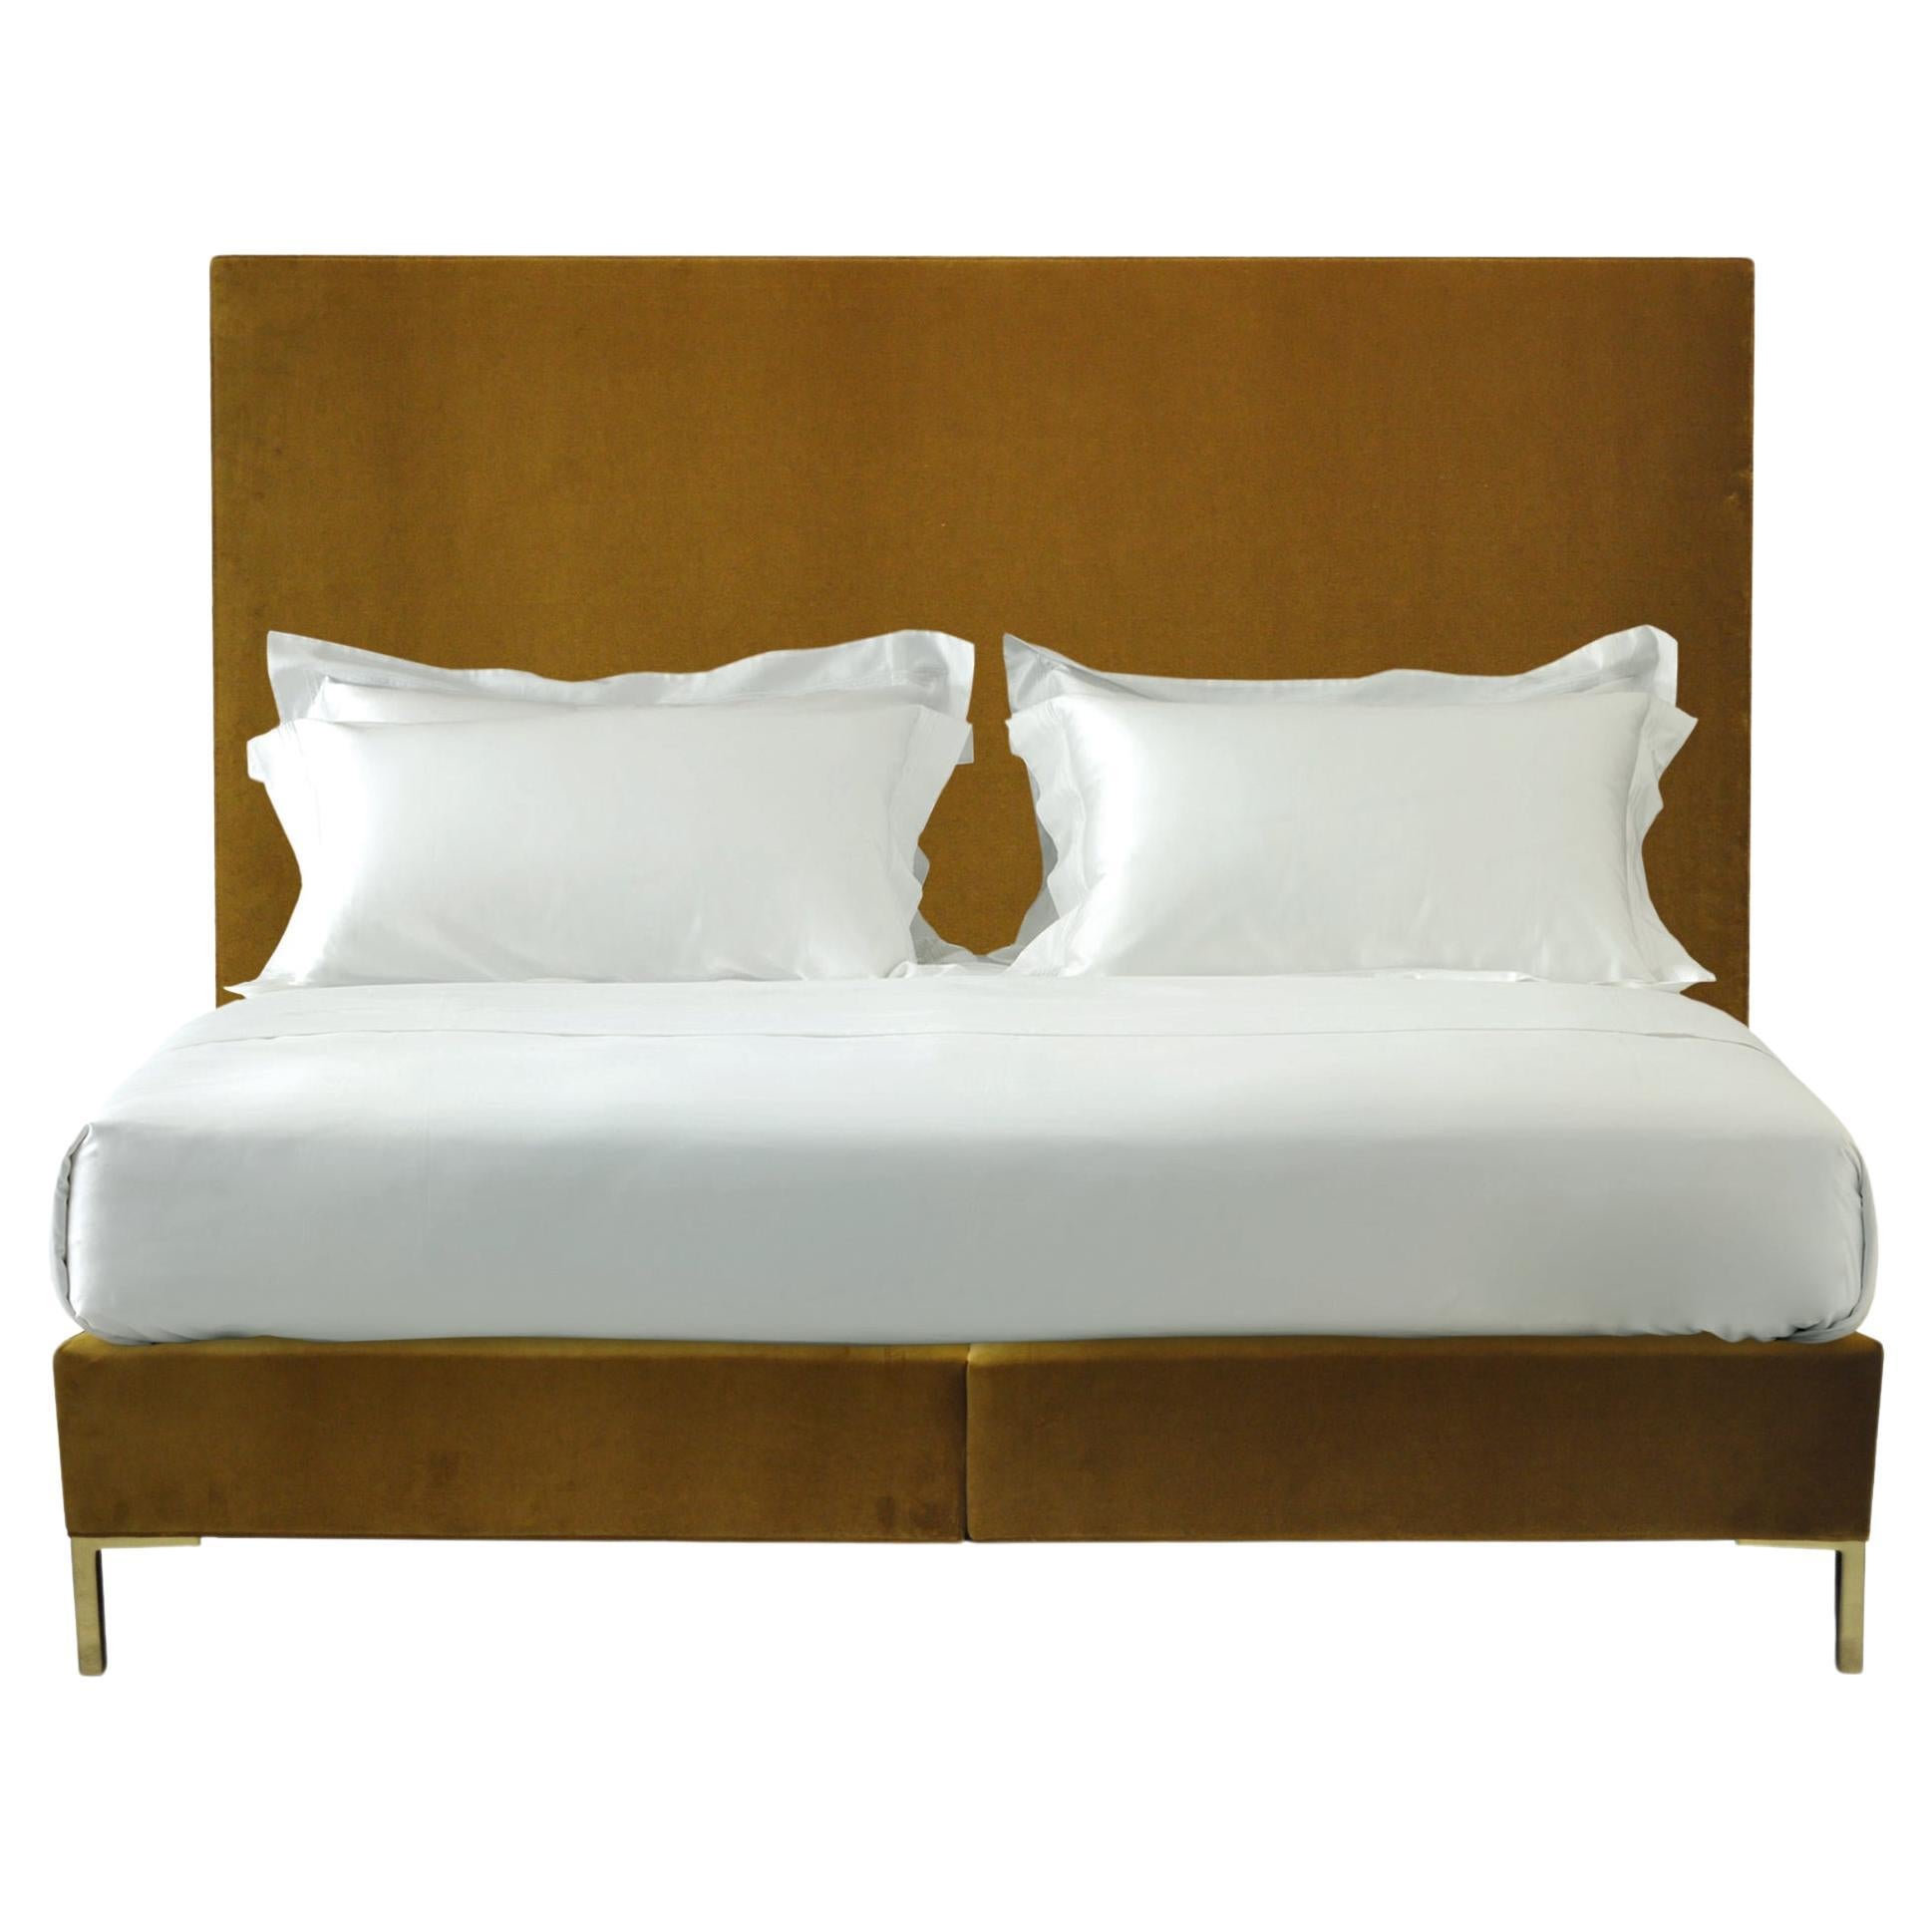 Handcrafted Savoir Harlech Headboard and Nº3 Bed Set, Bespoke, King Size For Sale